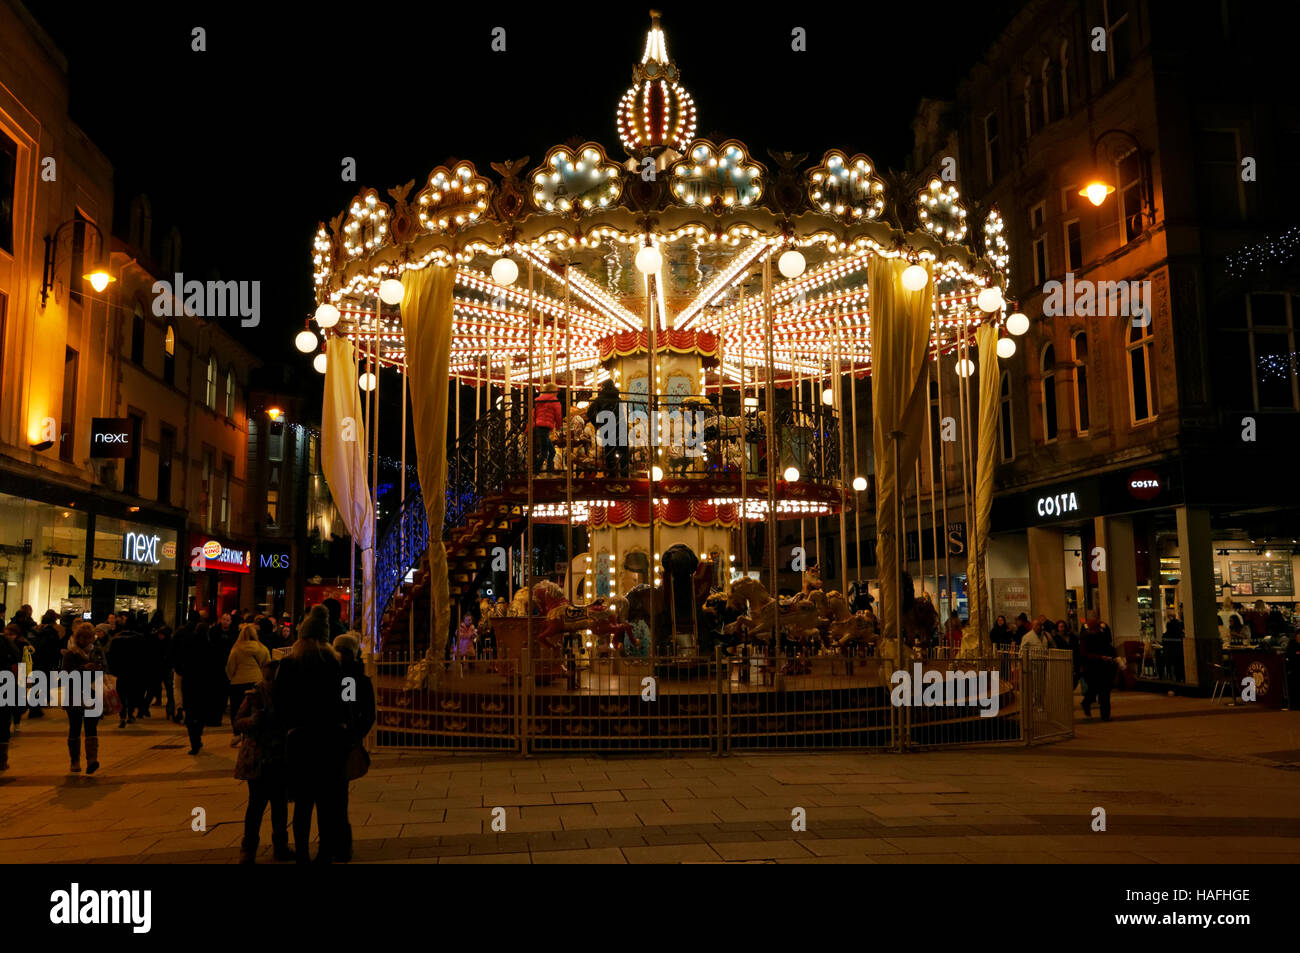 Carousel at night, Queen Streeet, Cardiff, Wales. Stock Photo